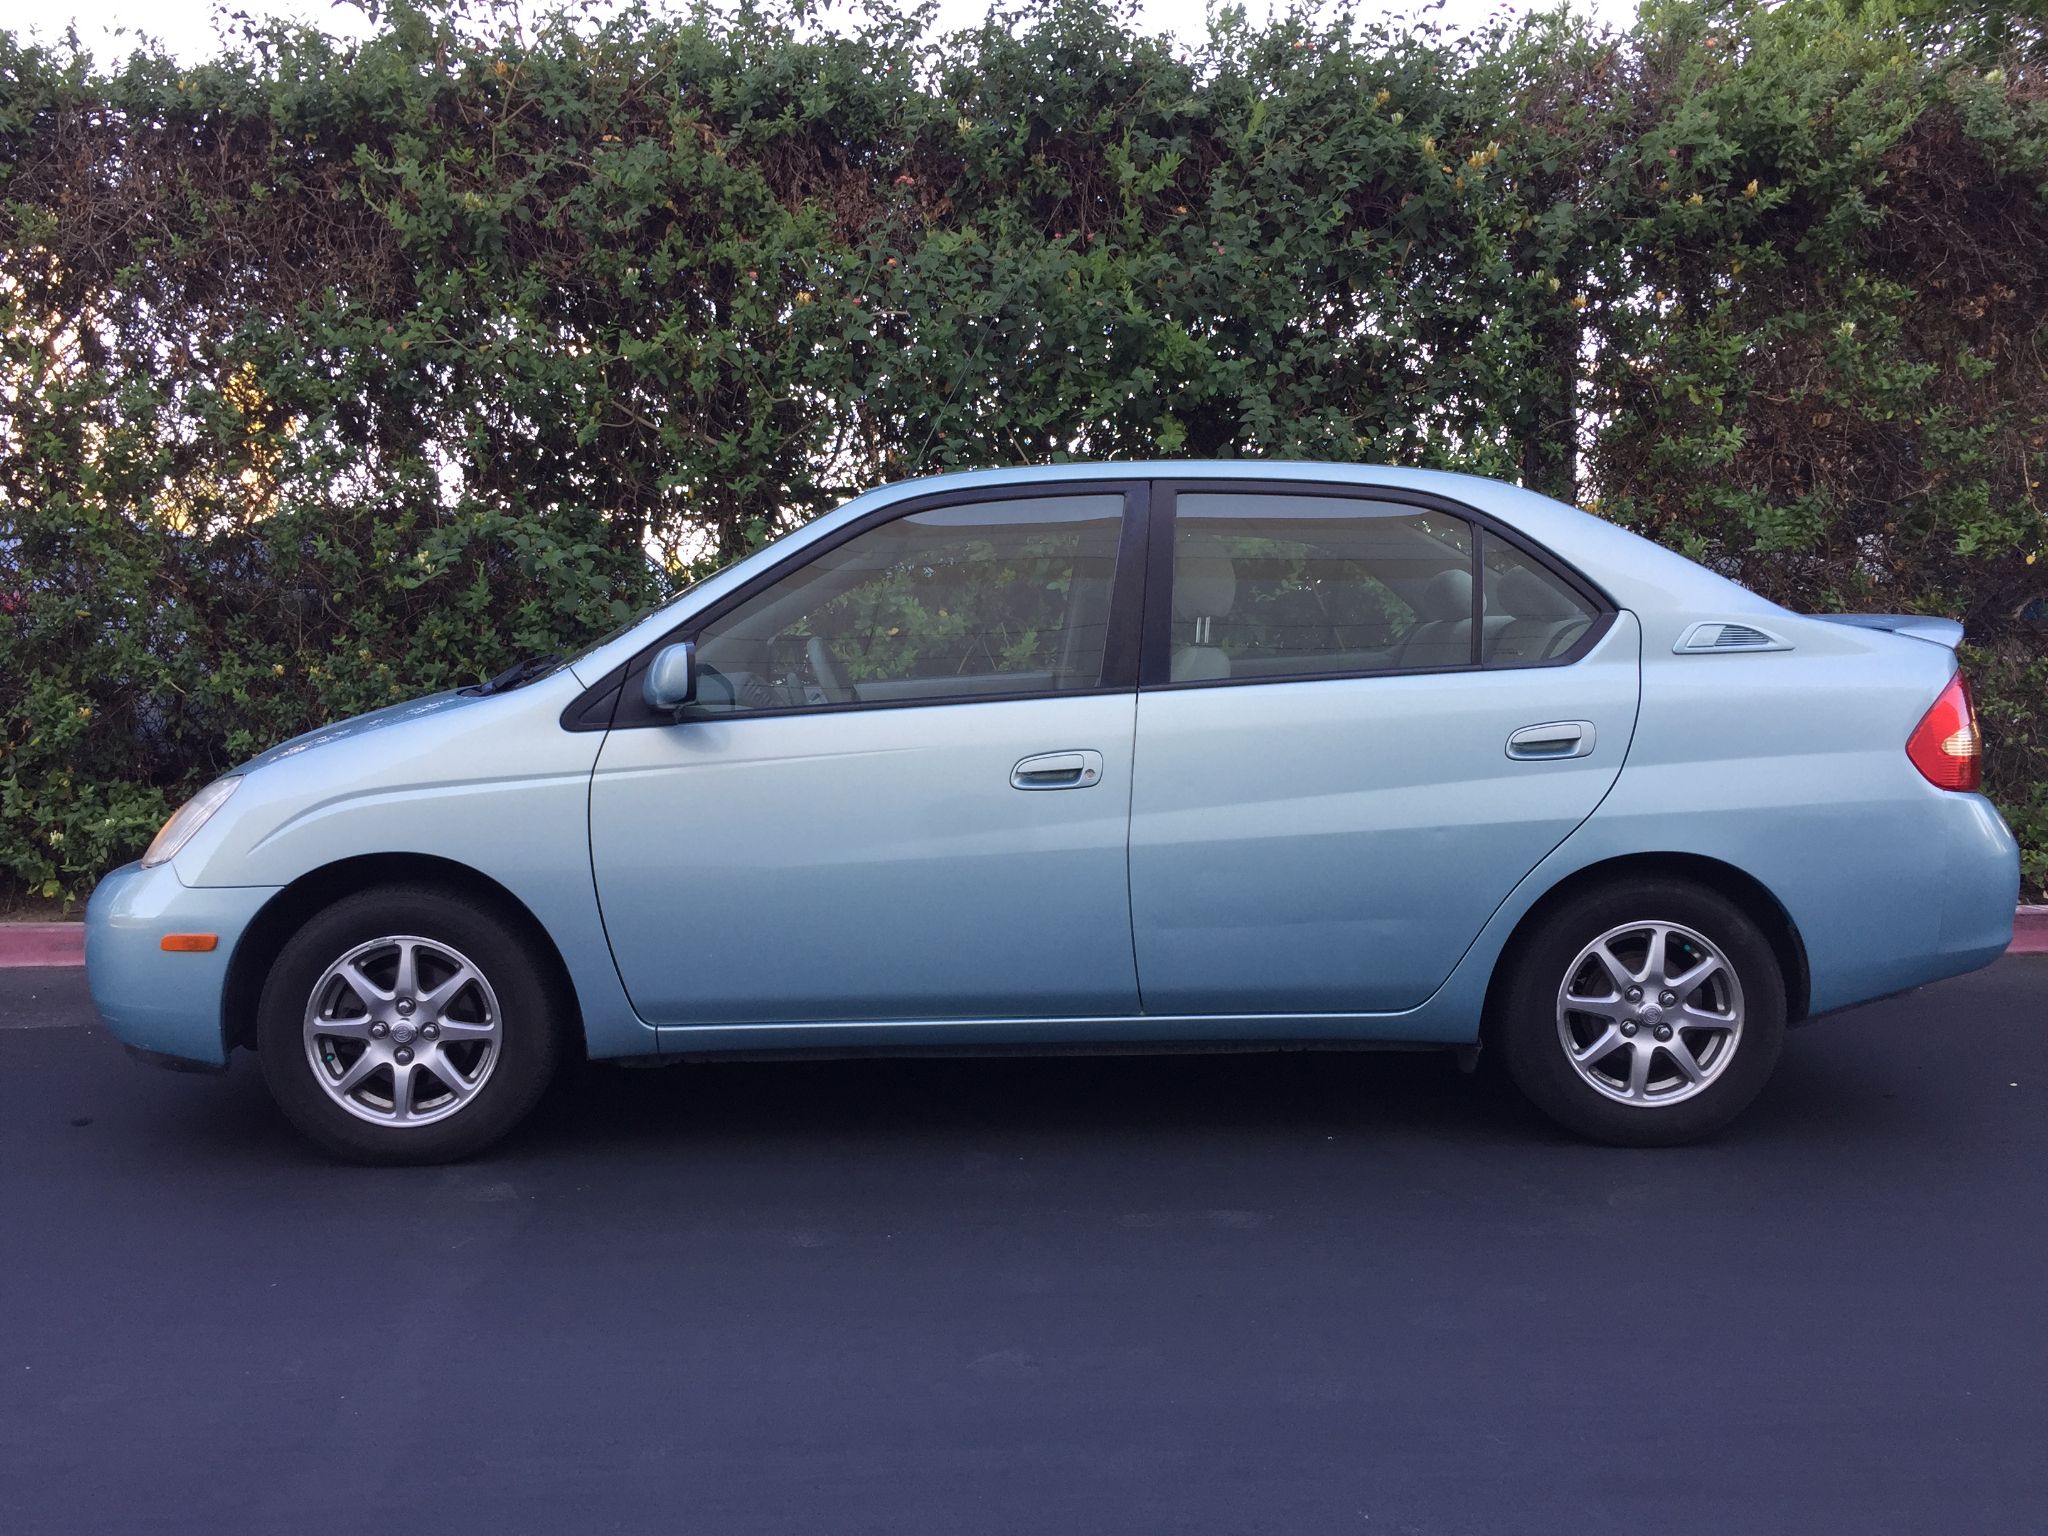 Used 2001 Toyota Prius ZX5 at City Cars Warehouse INC